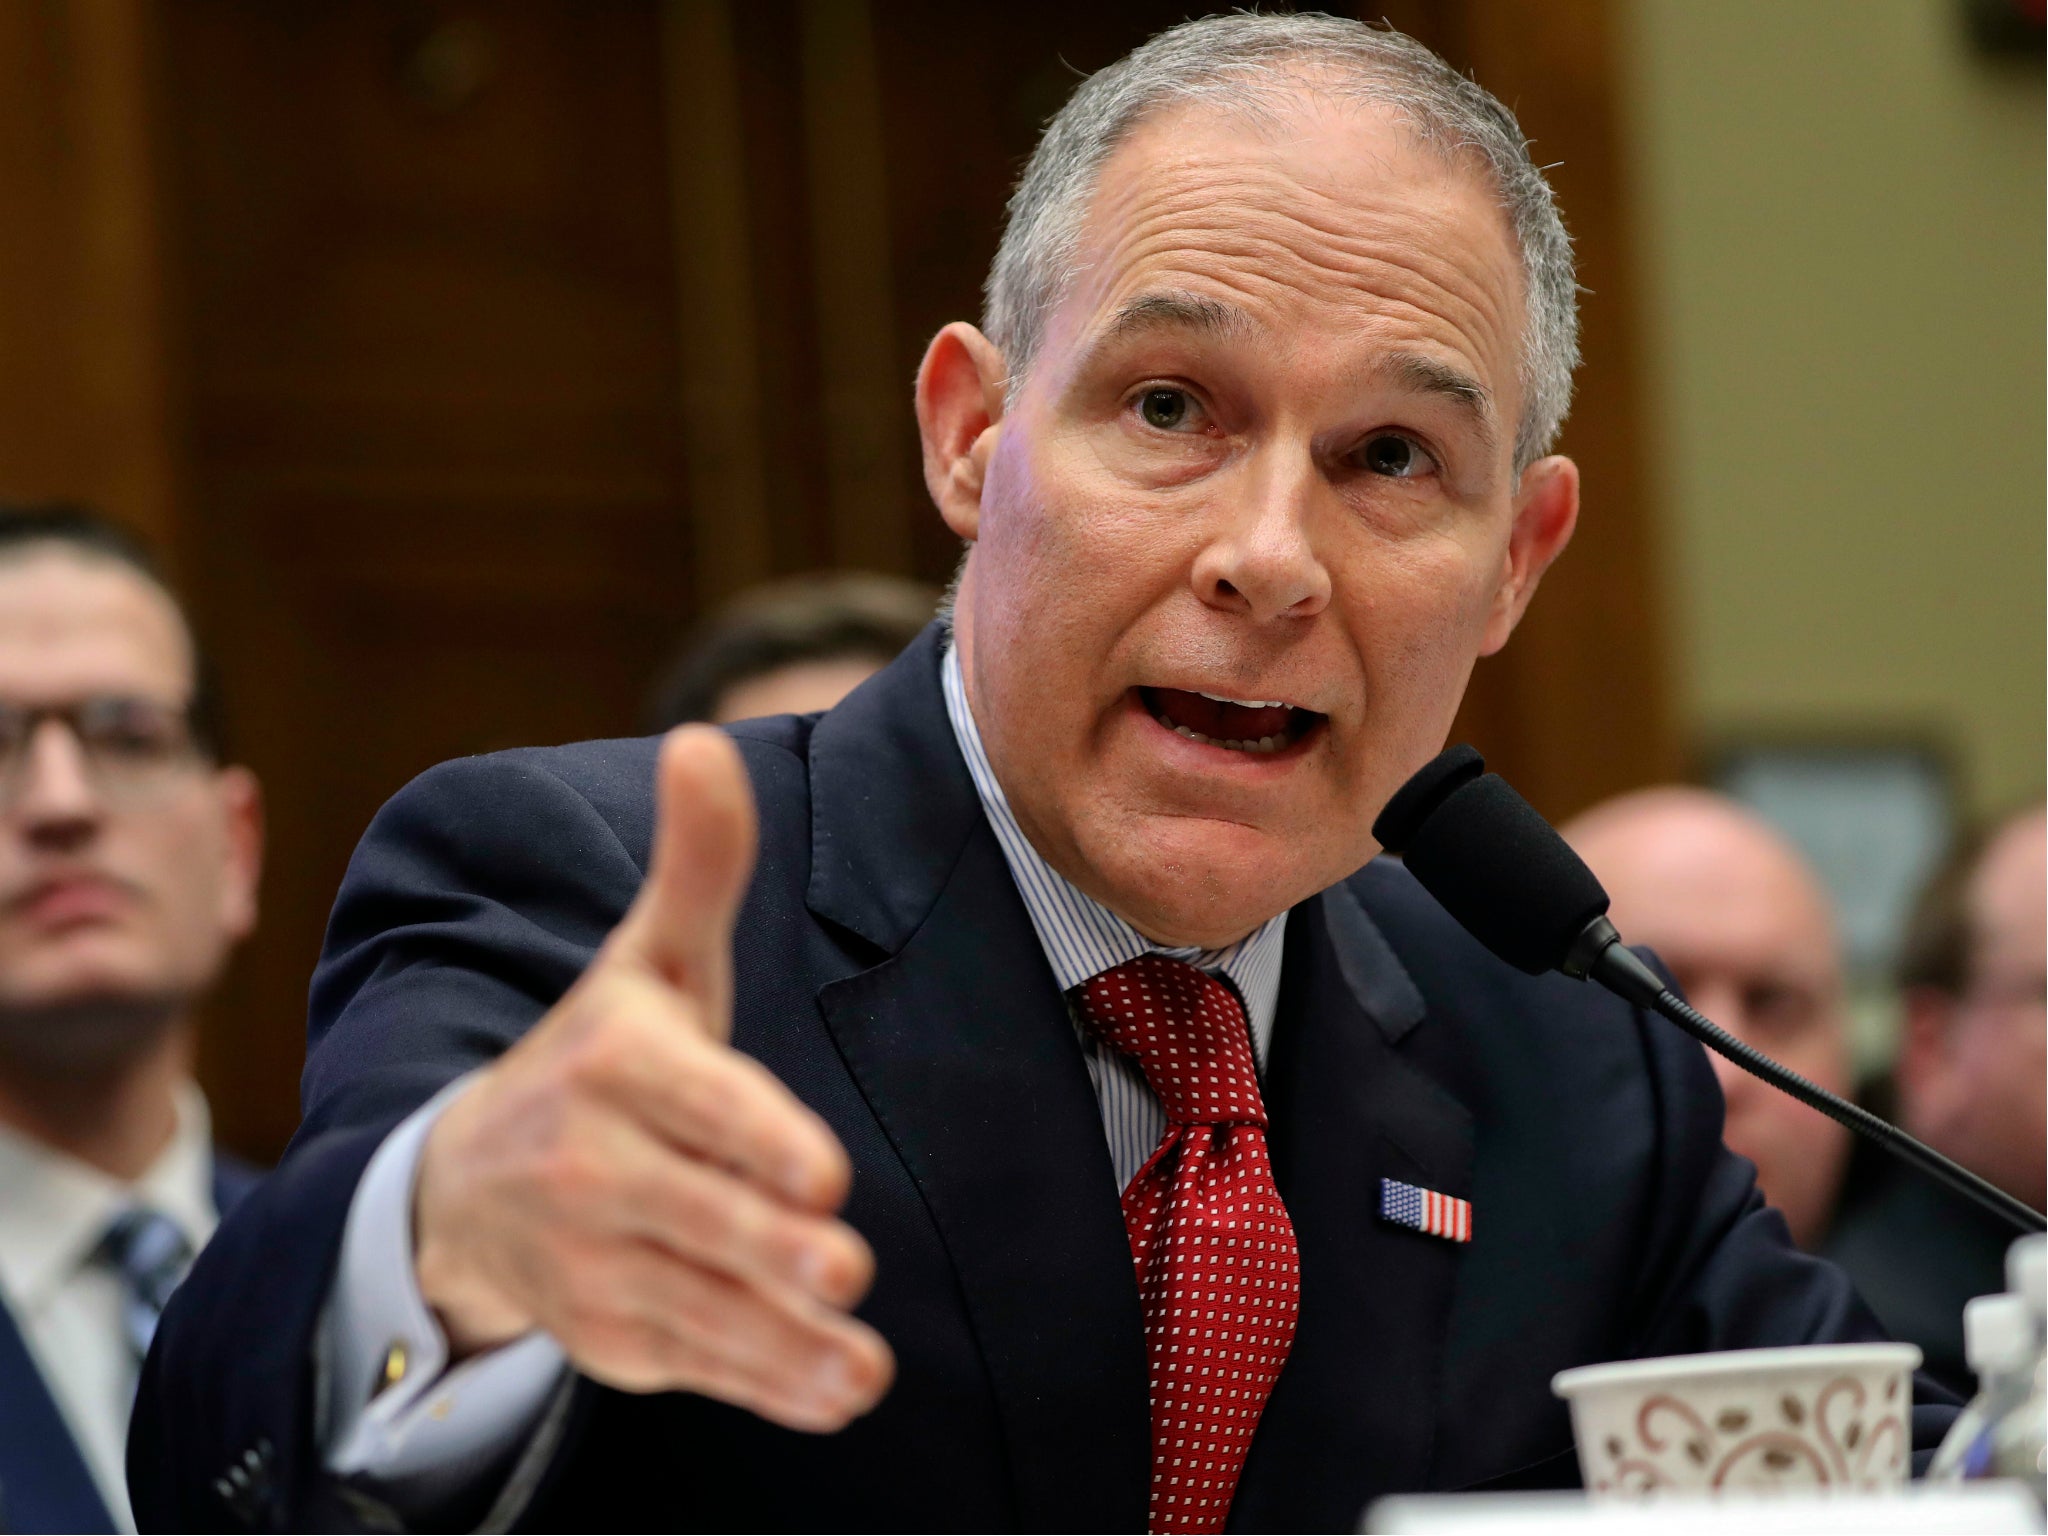 Mr Pruitt has been under fire for spending and ethics scandals during his tenure as the chief of the EPA